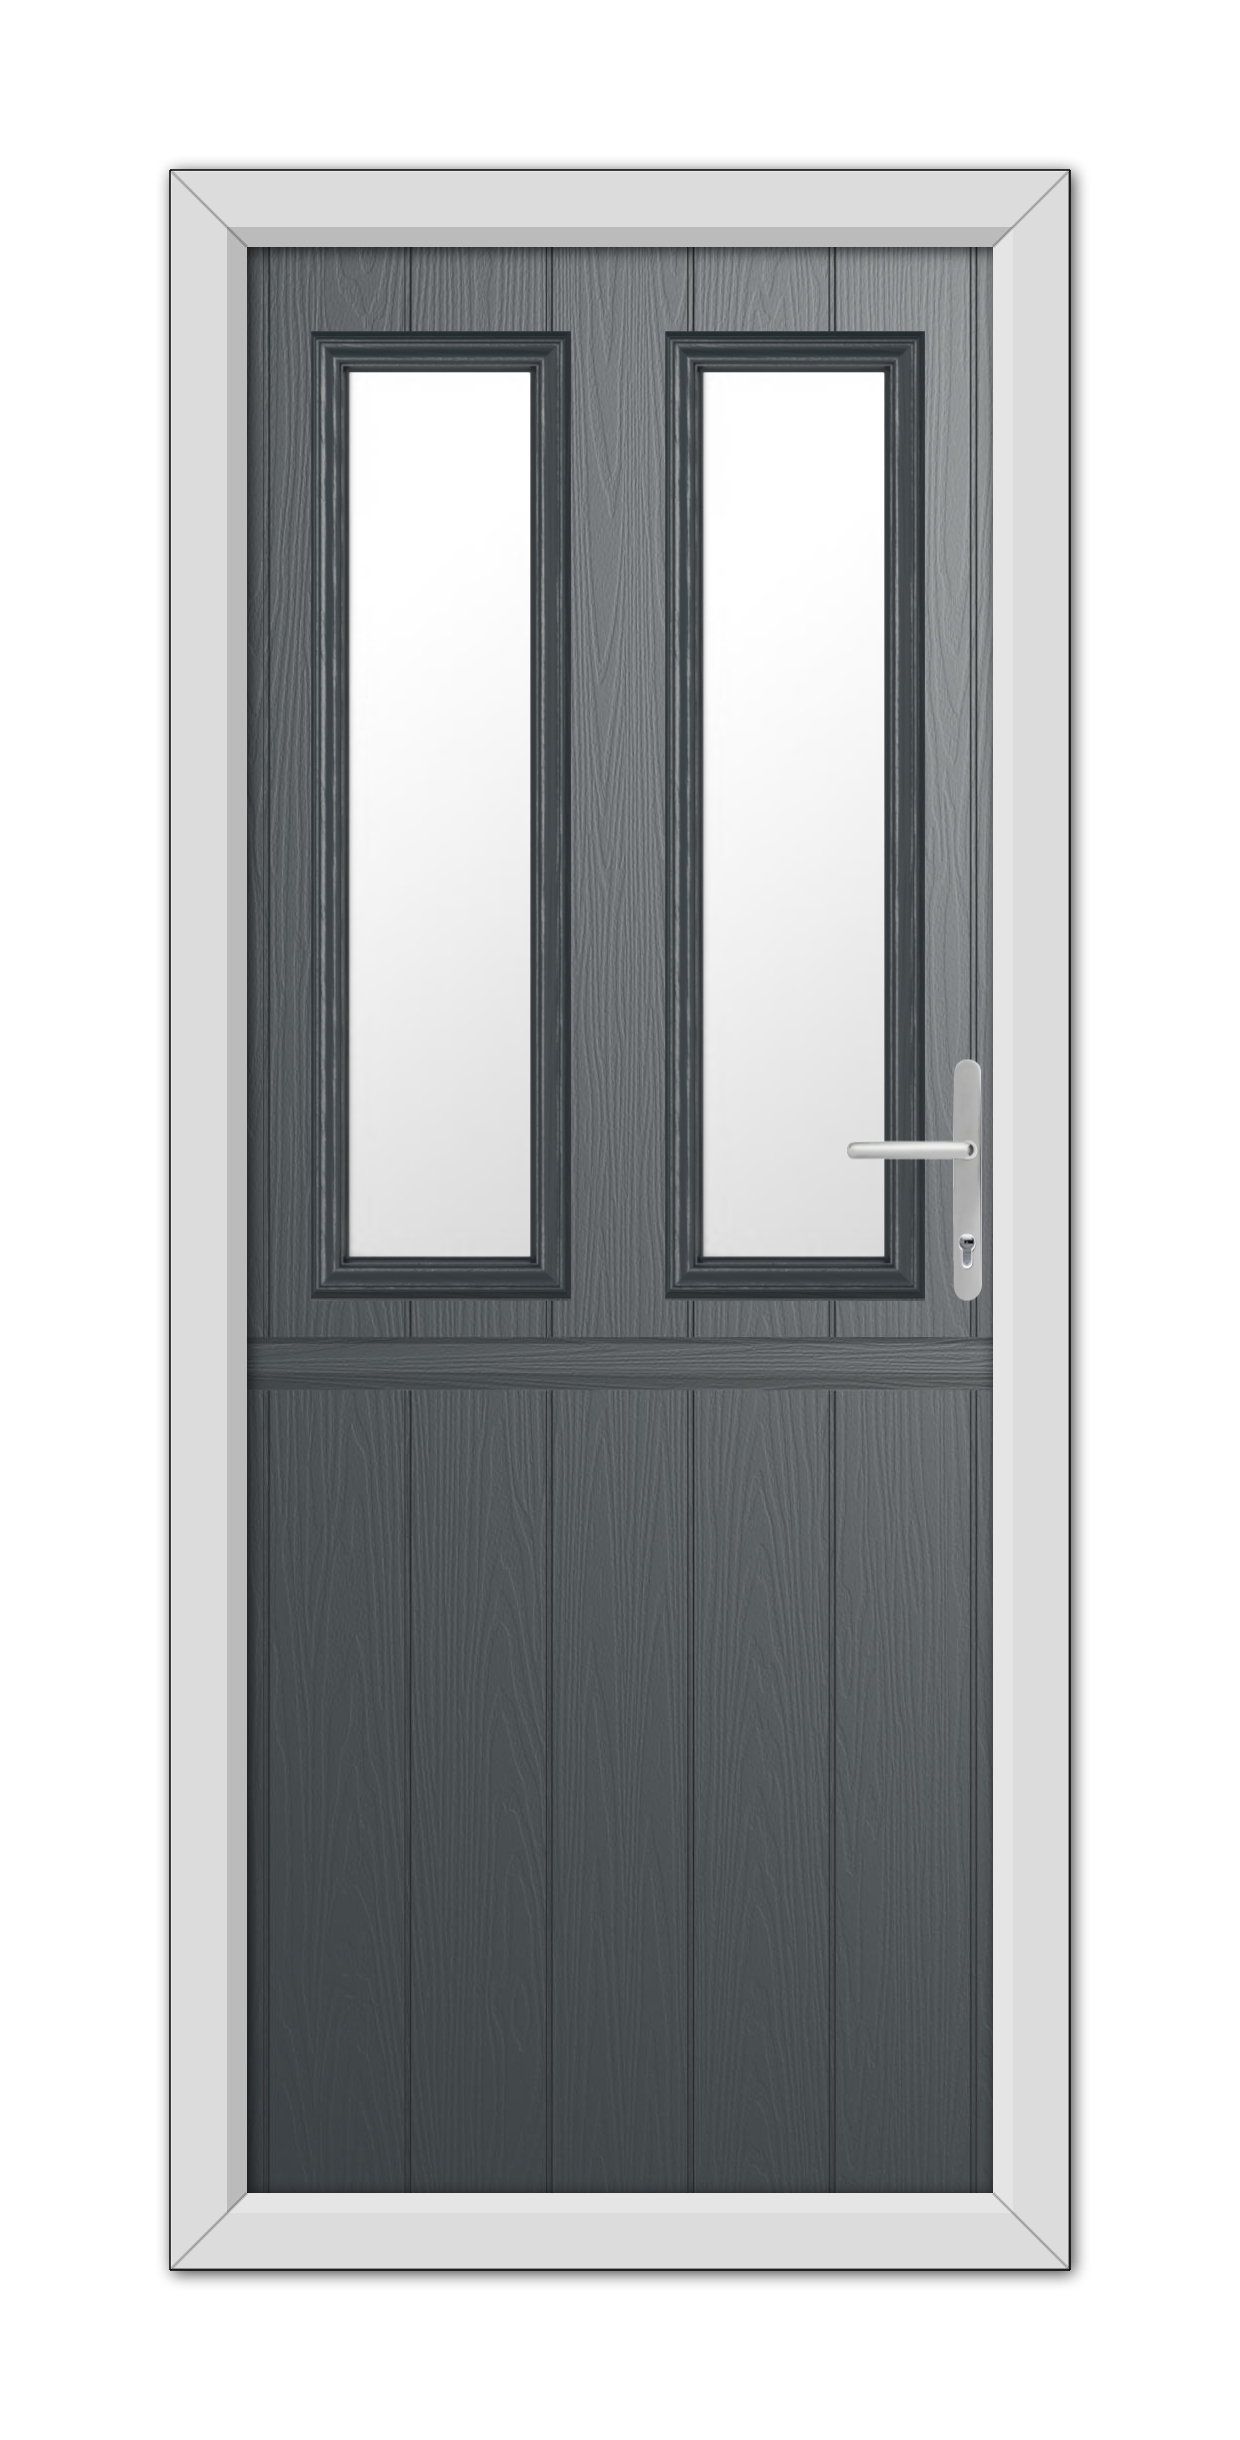 Anthracite Grey Wellington Stable Composite Door 48mm Timber Core with a grey wood texture, featuring two vertical glass panels and a modern handle, set within a white frame.